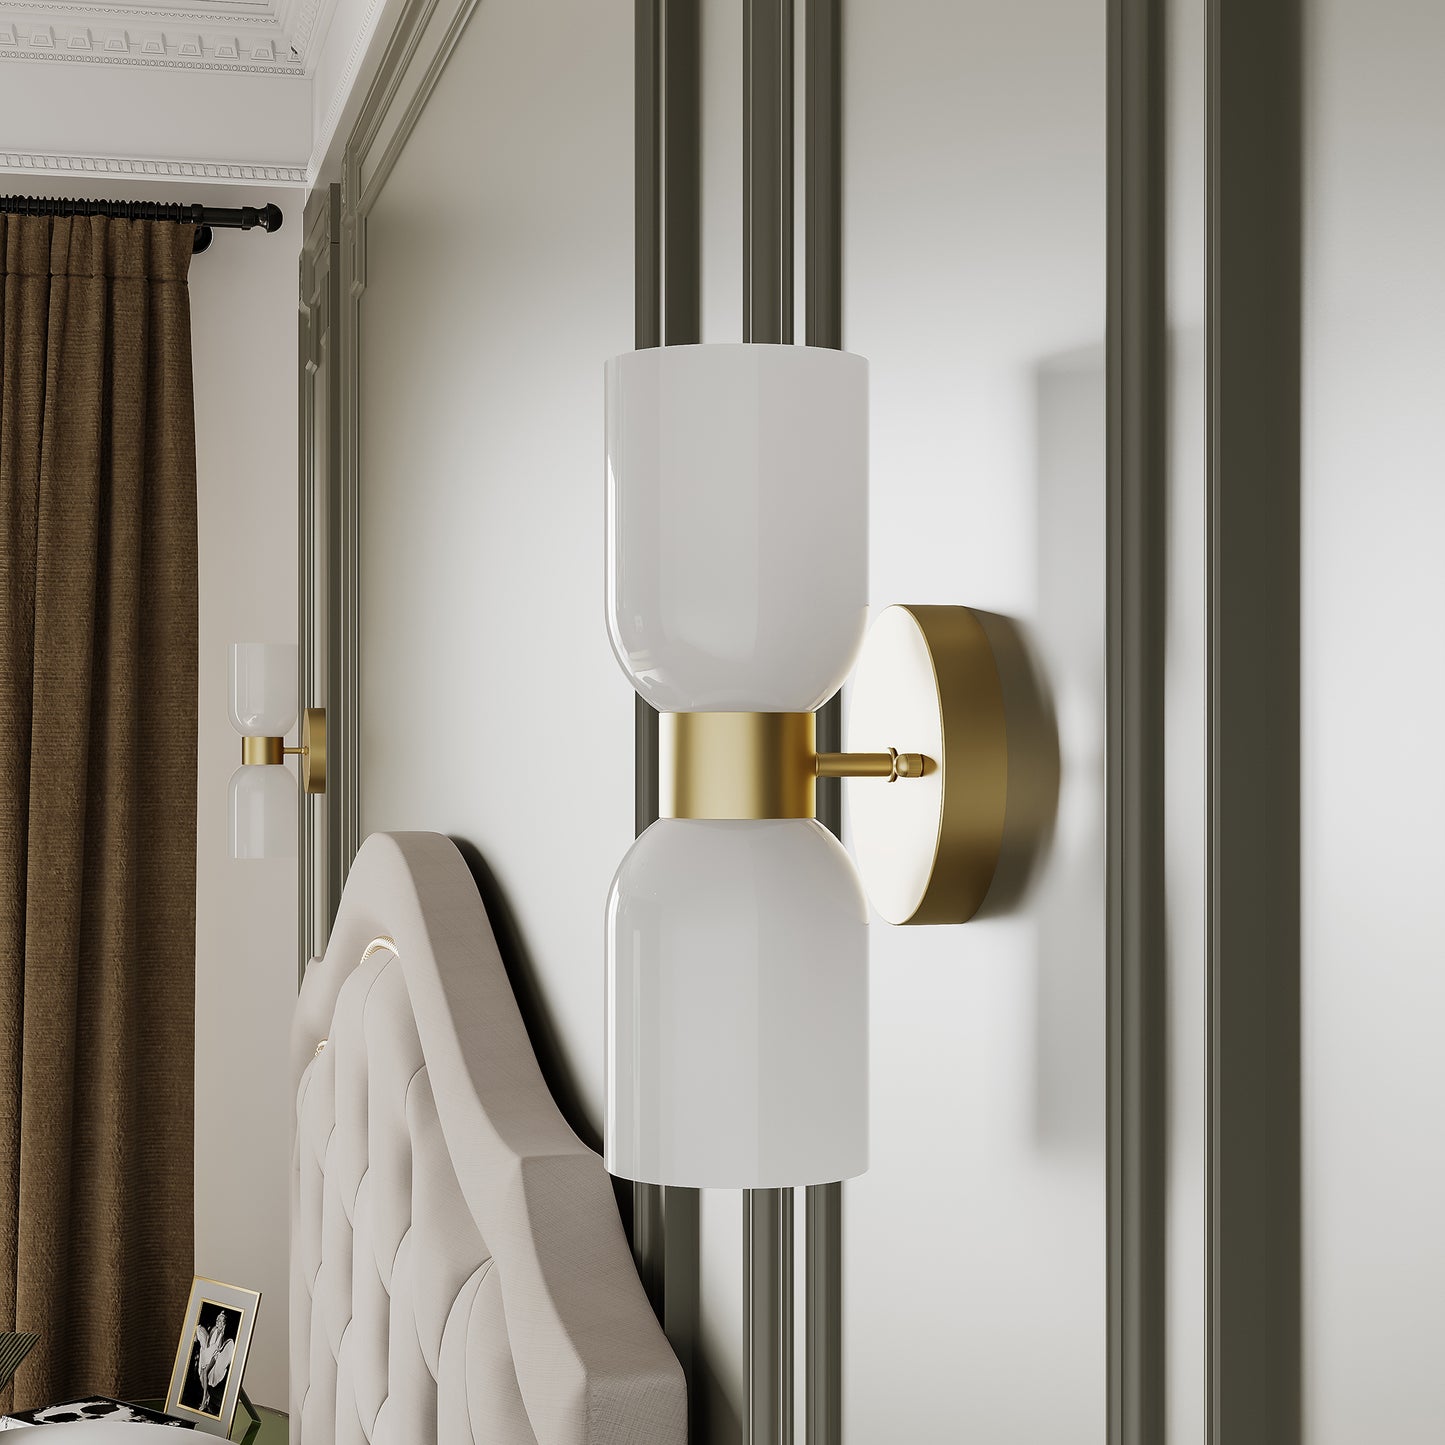 2 light milky glass wall sconce (1) by ACROMA